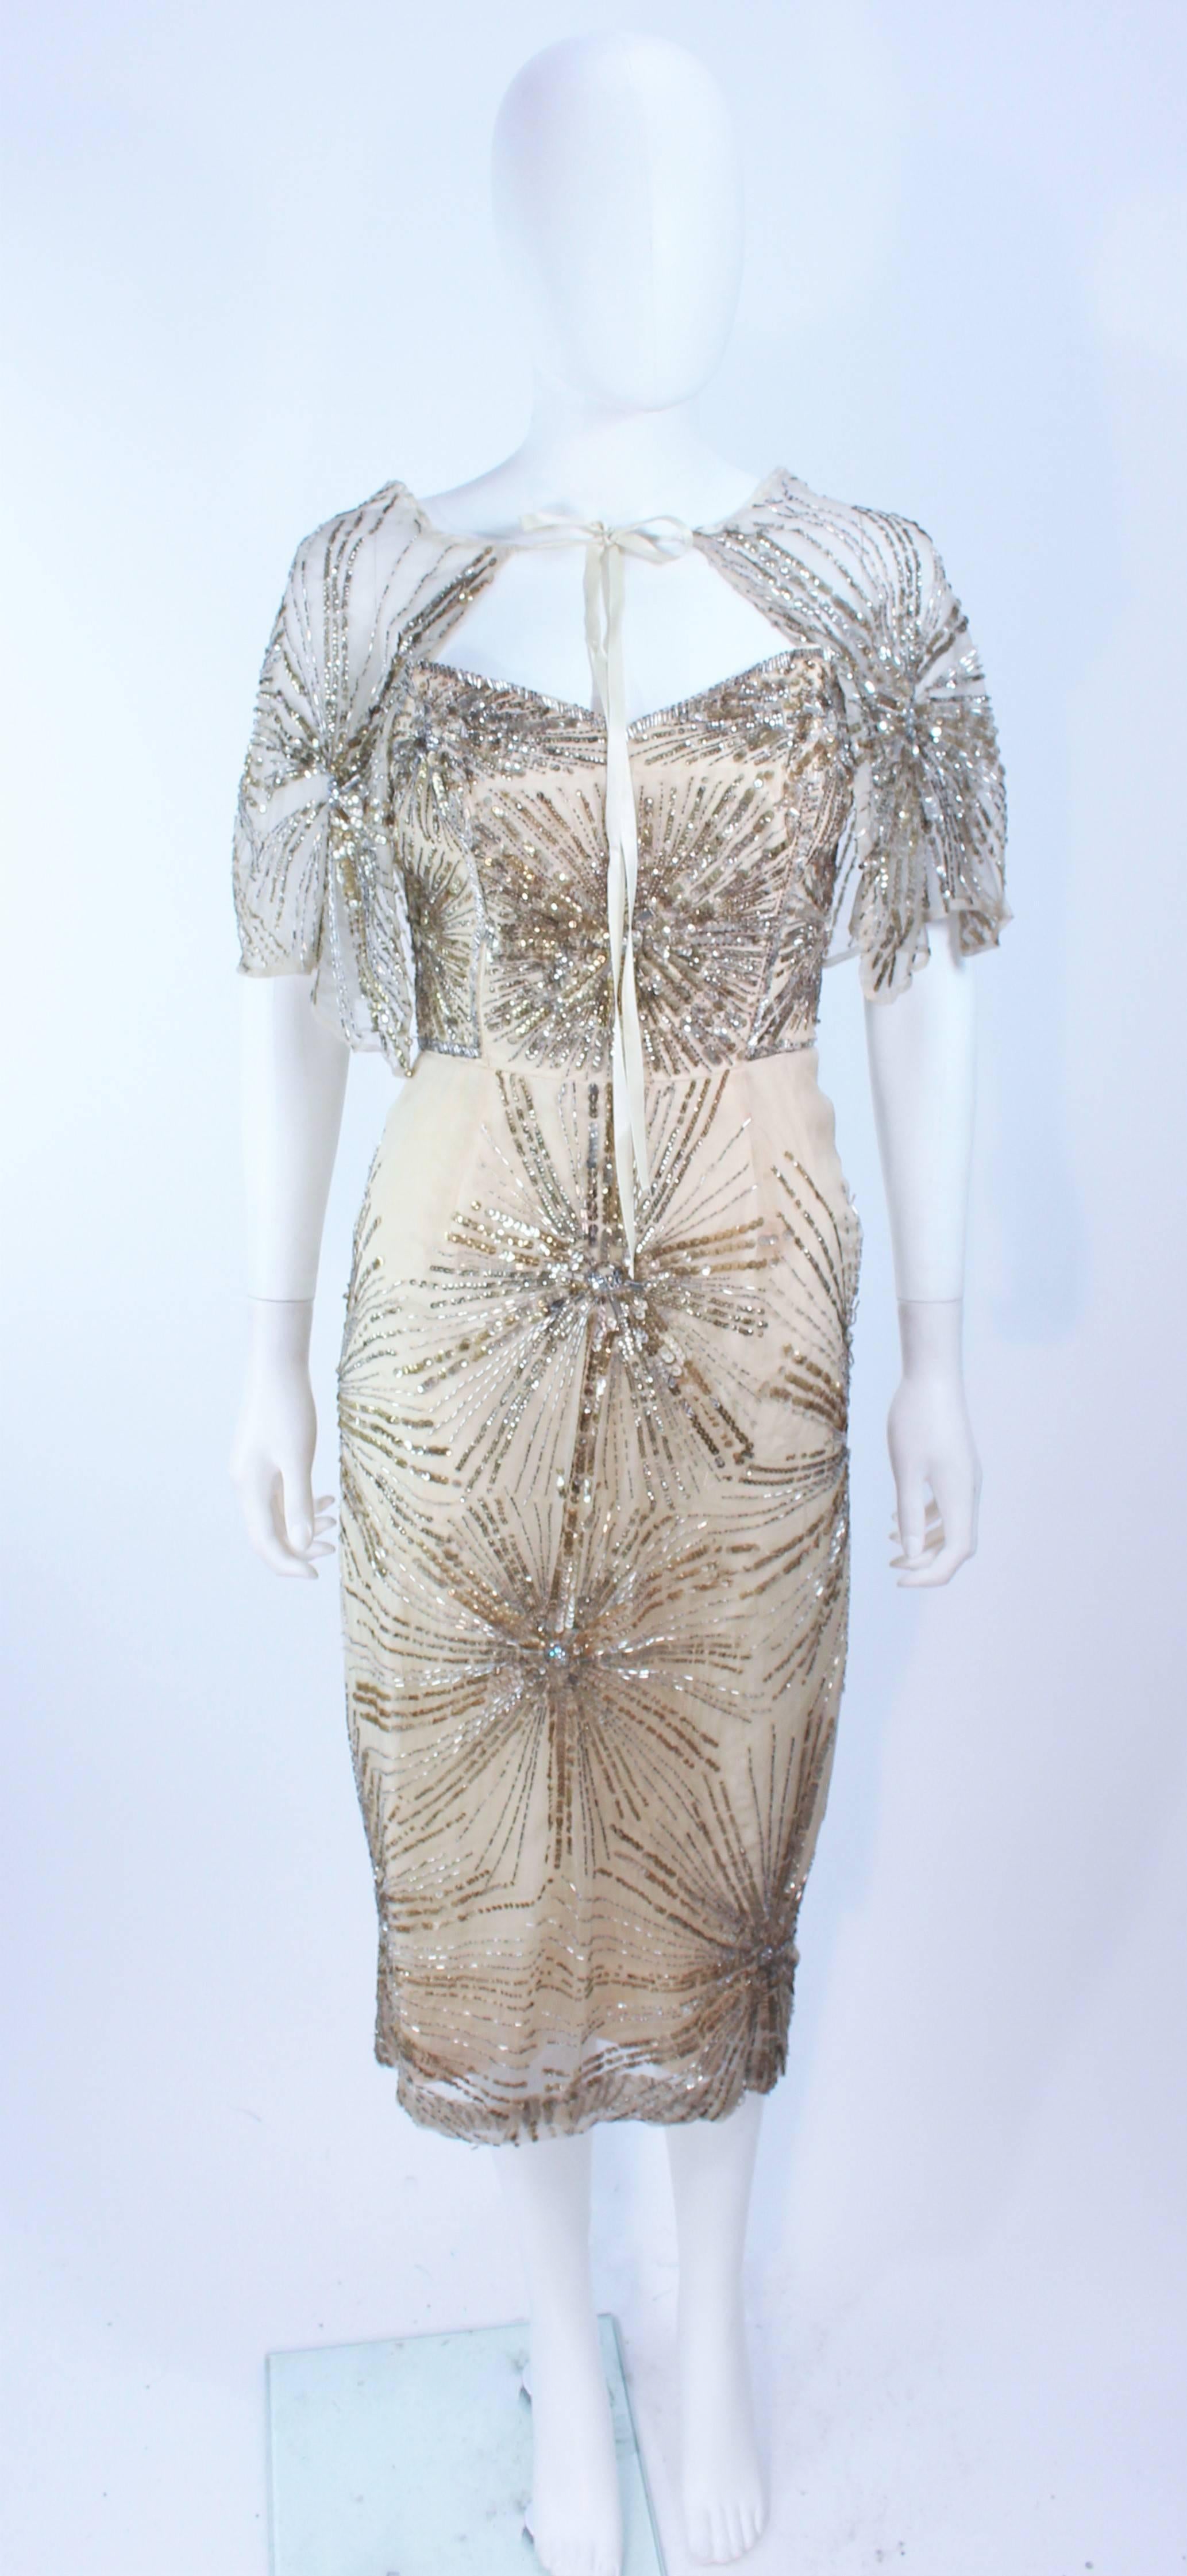 This set is composed of a beaded and sequin appliqued ivory hue silk. Features a caplet with silk ties and a pointed slim silhouette design cocktail dress. There is a side zipper closure. An excellent design in antique vintage condition, there is